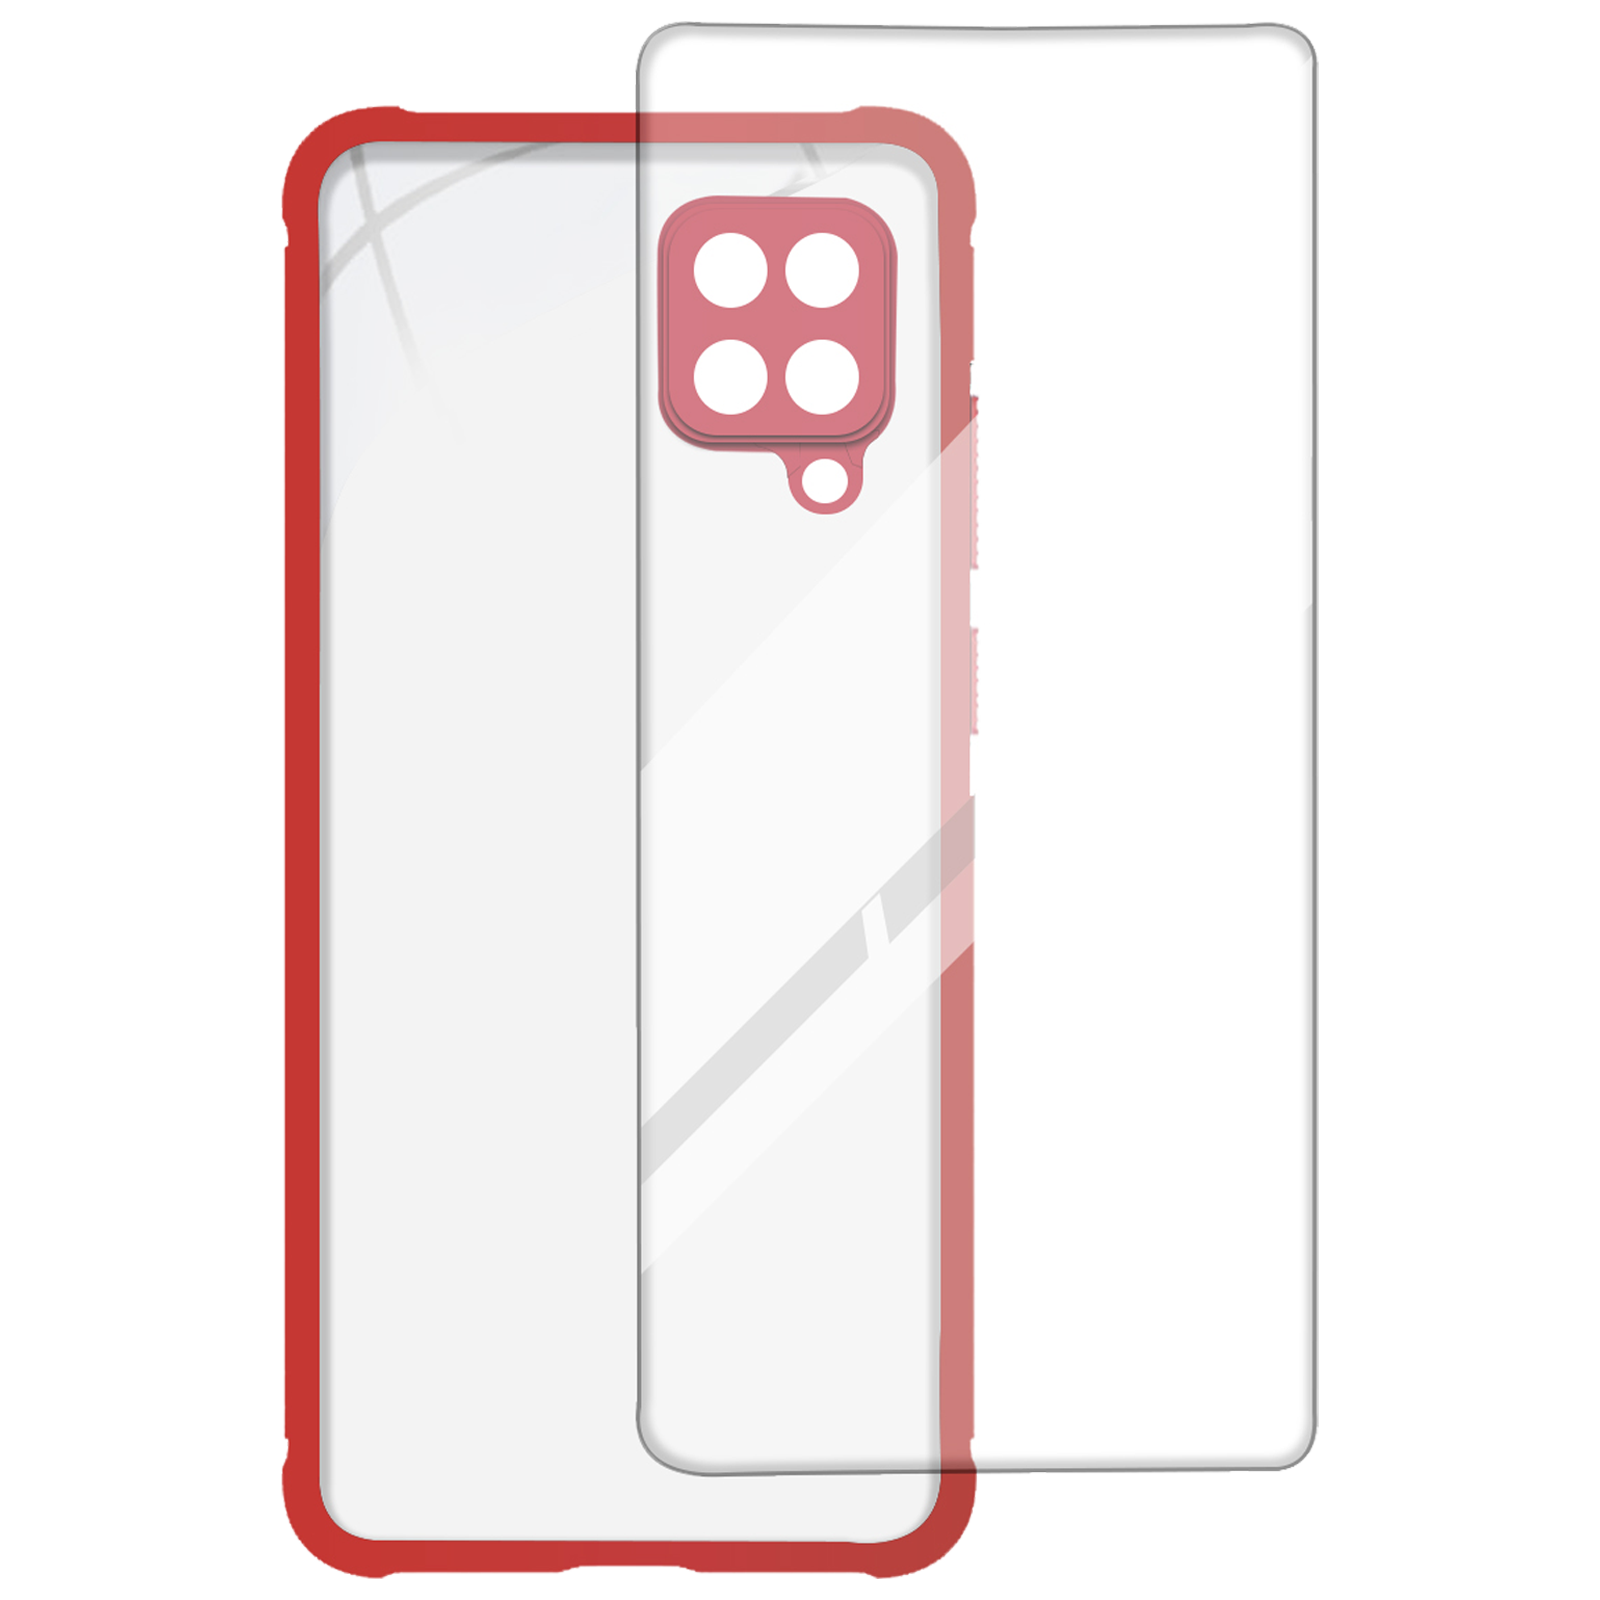 arrow - Arrow Hybrid Back Case and Screen Protector Bundle For samsung Galaxy A12 (Ultra Transparent Visibility, AR-1050, Red)